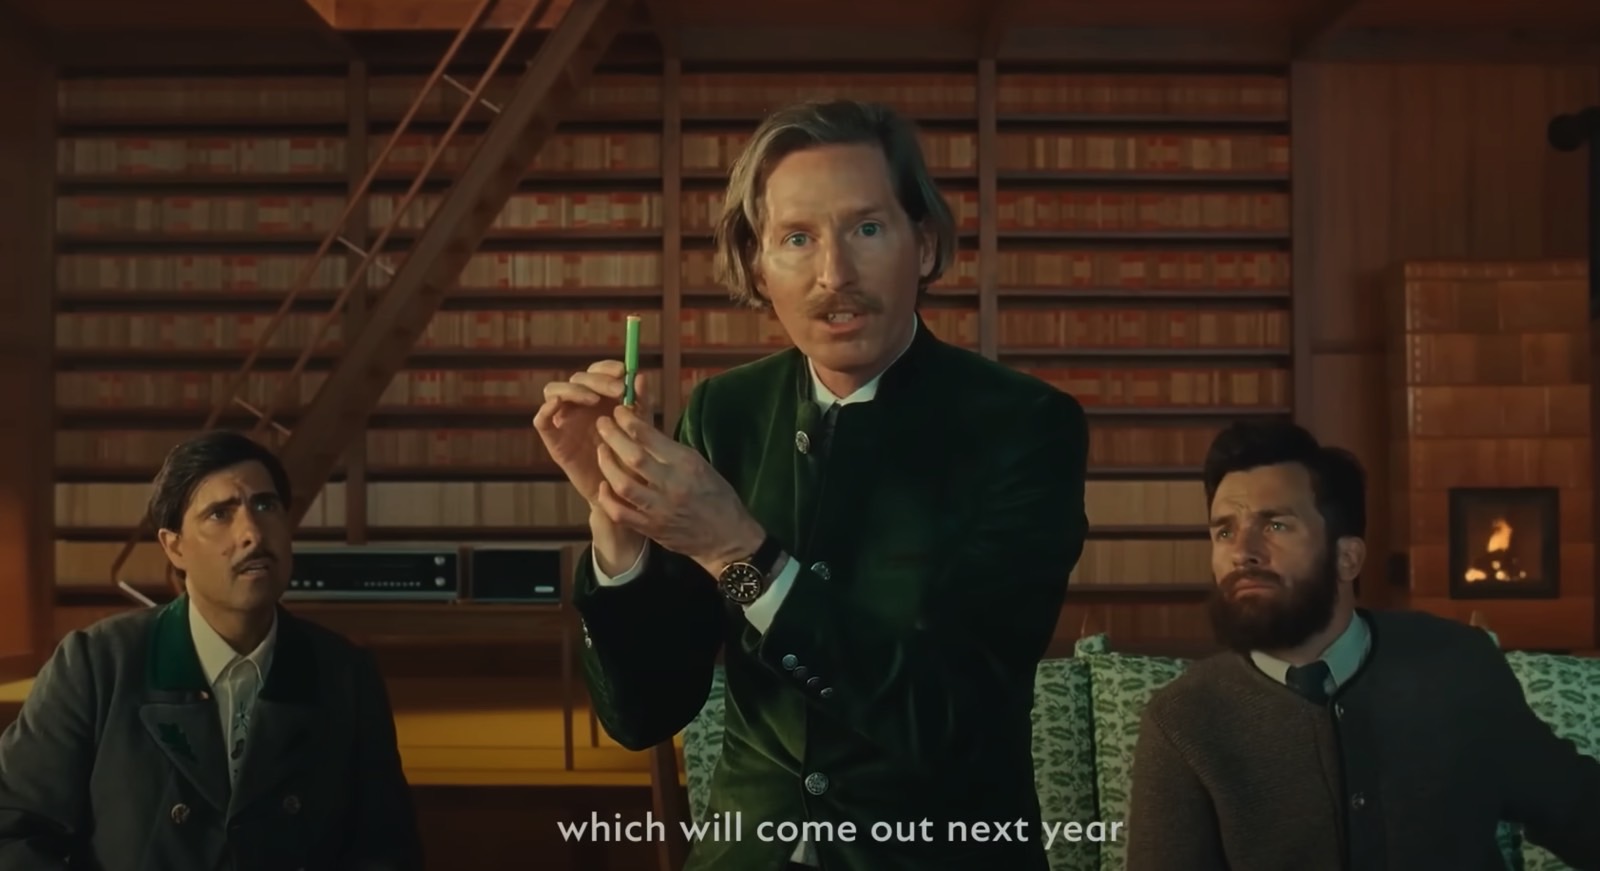 Wes Anderson in his Montblanc ad holding the pen he created.